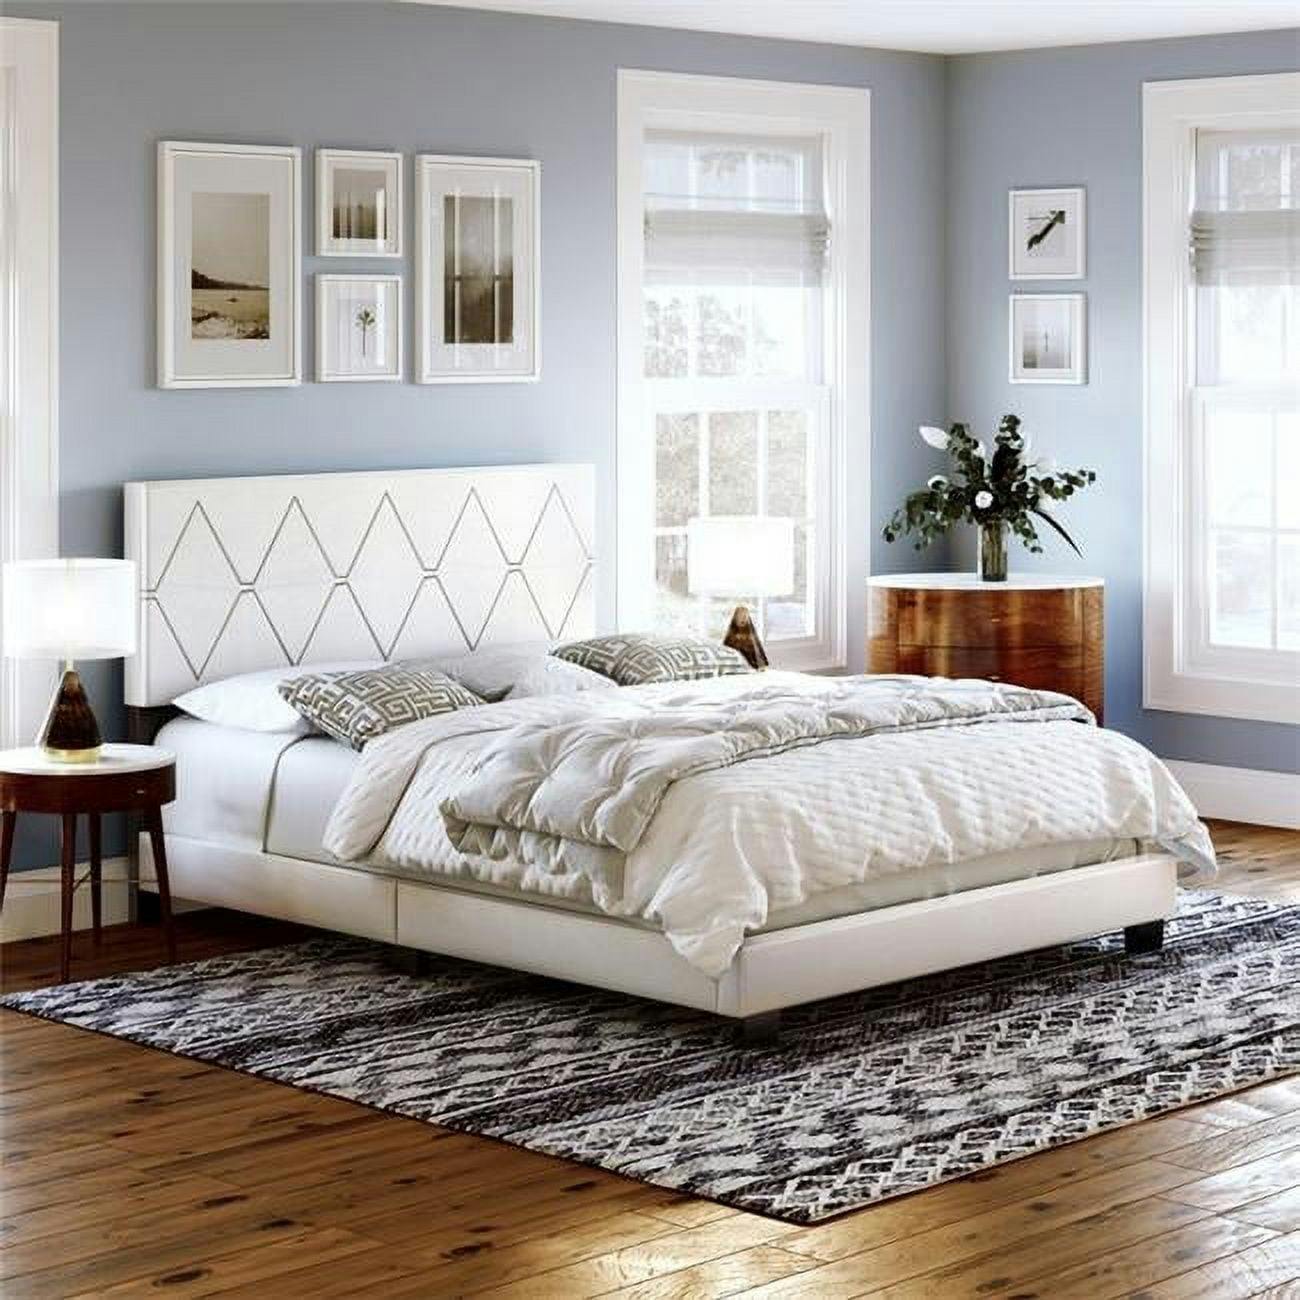 Ciara Contemporary Full Double Diamond Stitched Faux Leather Platform Bed